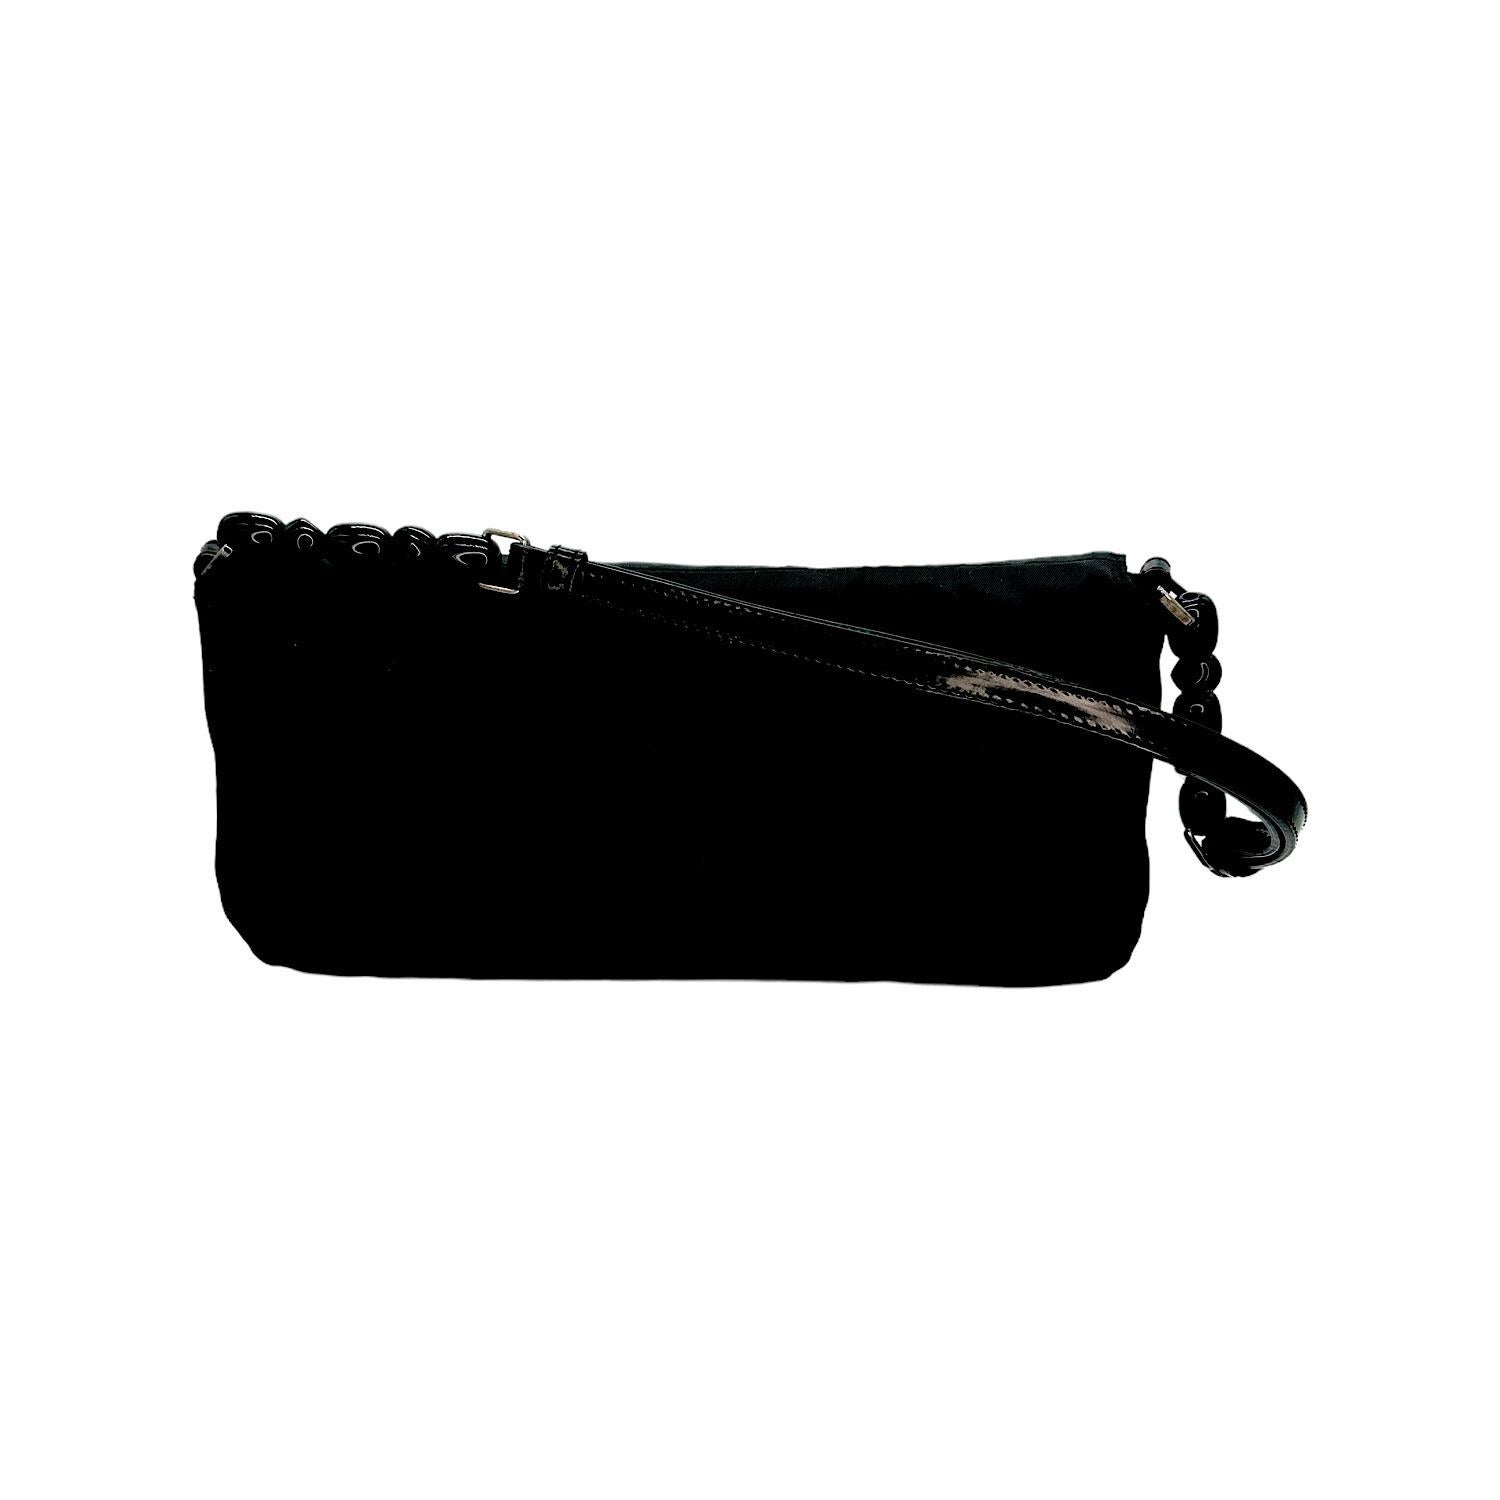 Christian Dior Nylon Malice Baguette Black Clutch In Excellent Condition For Sale In Scottsdale, AZ